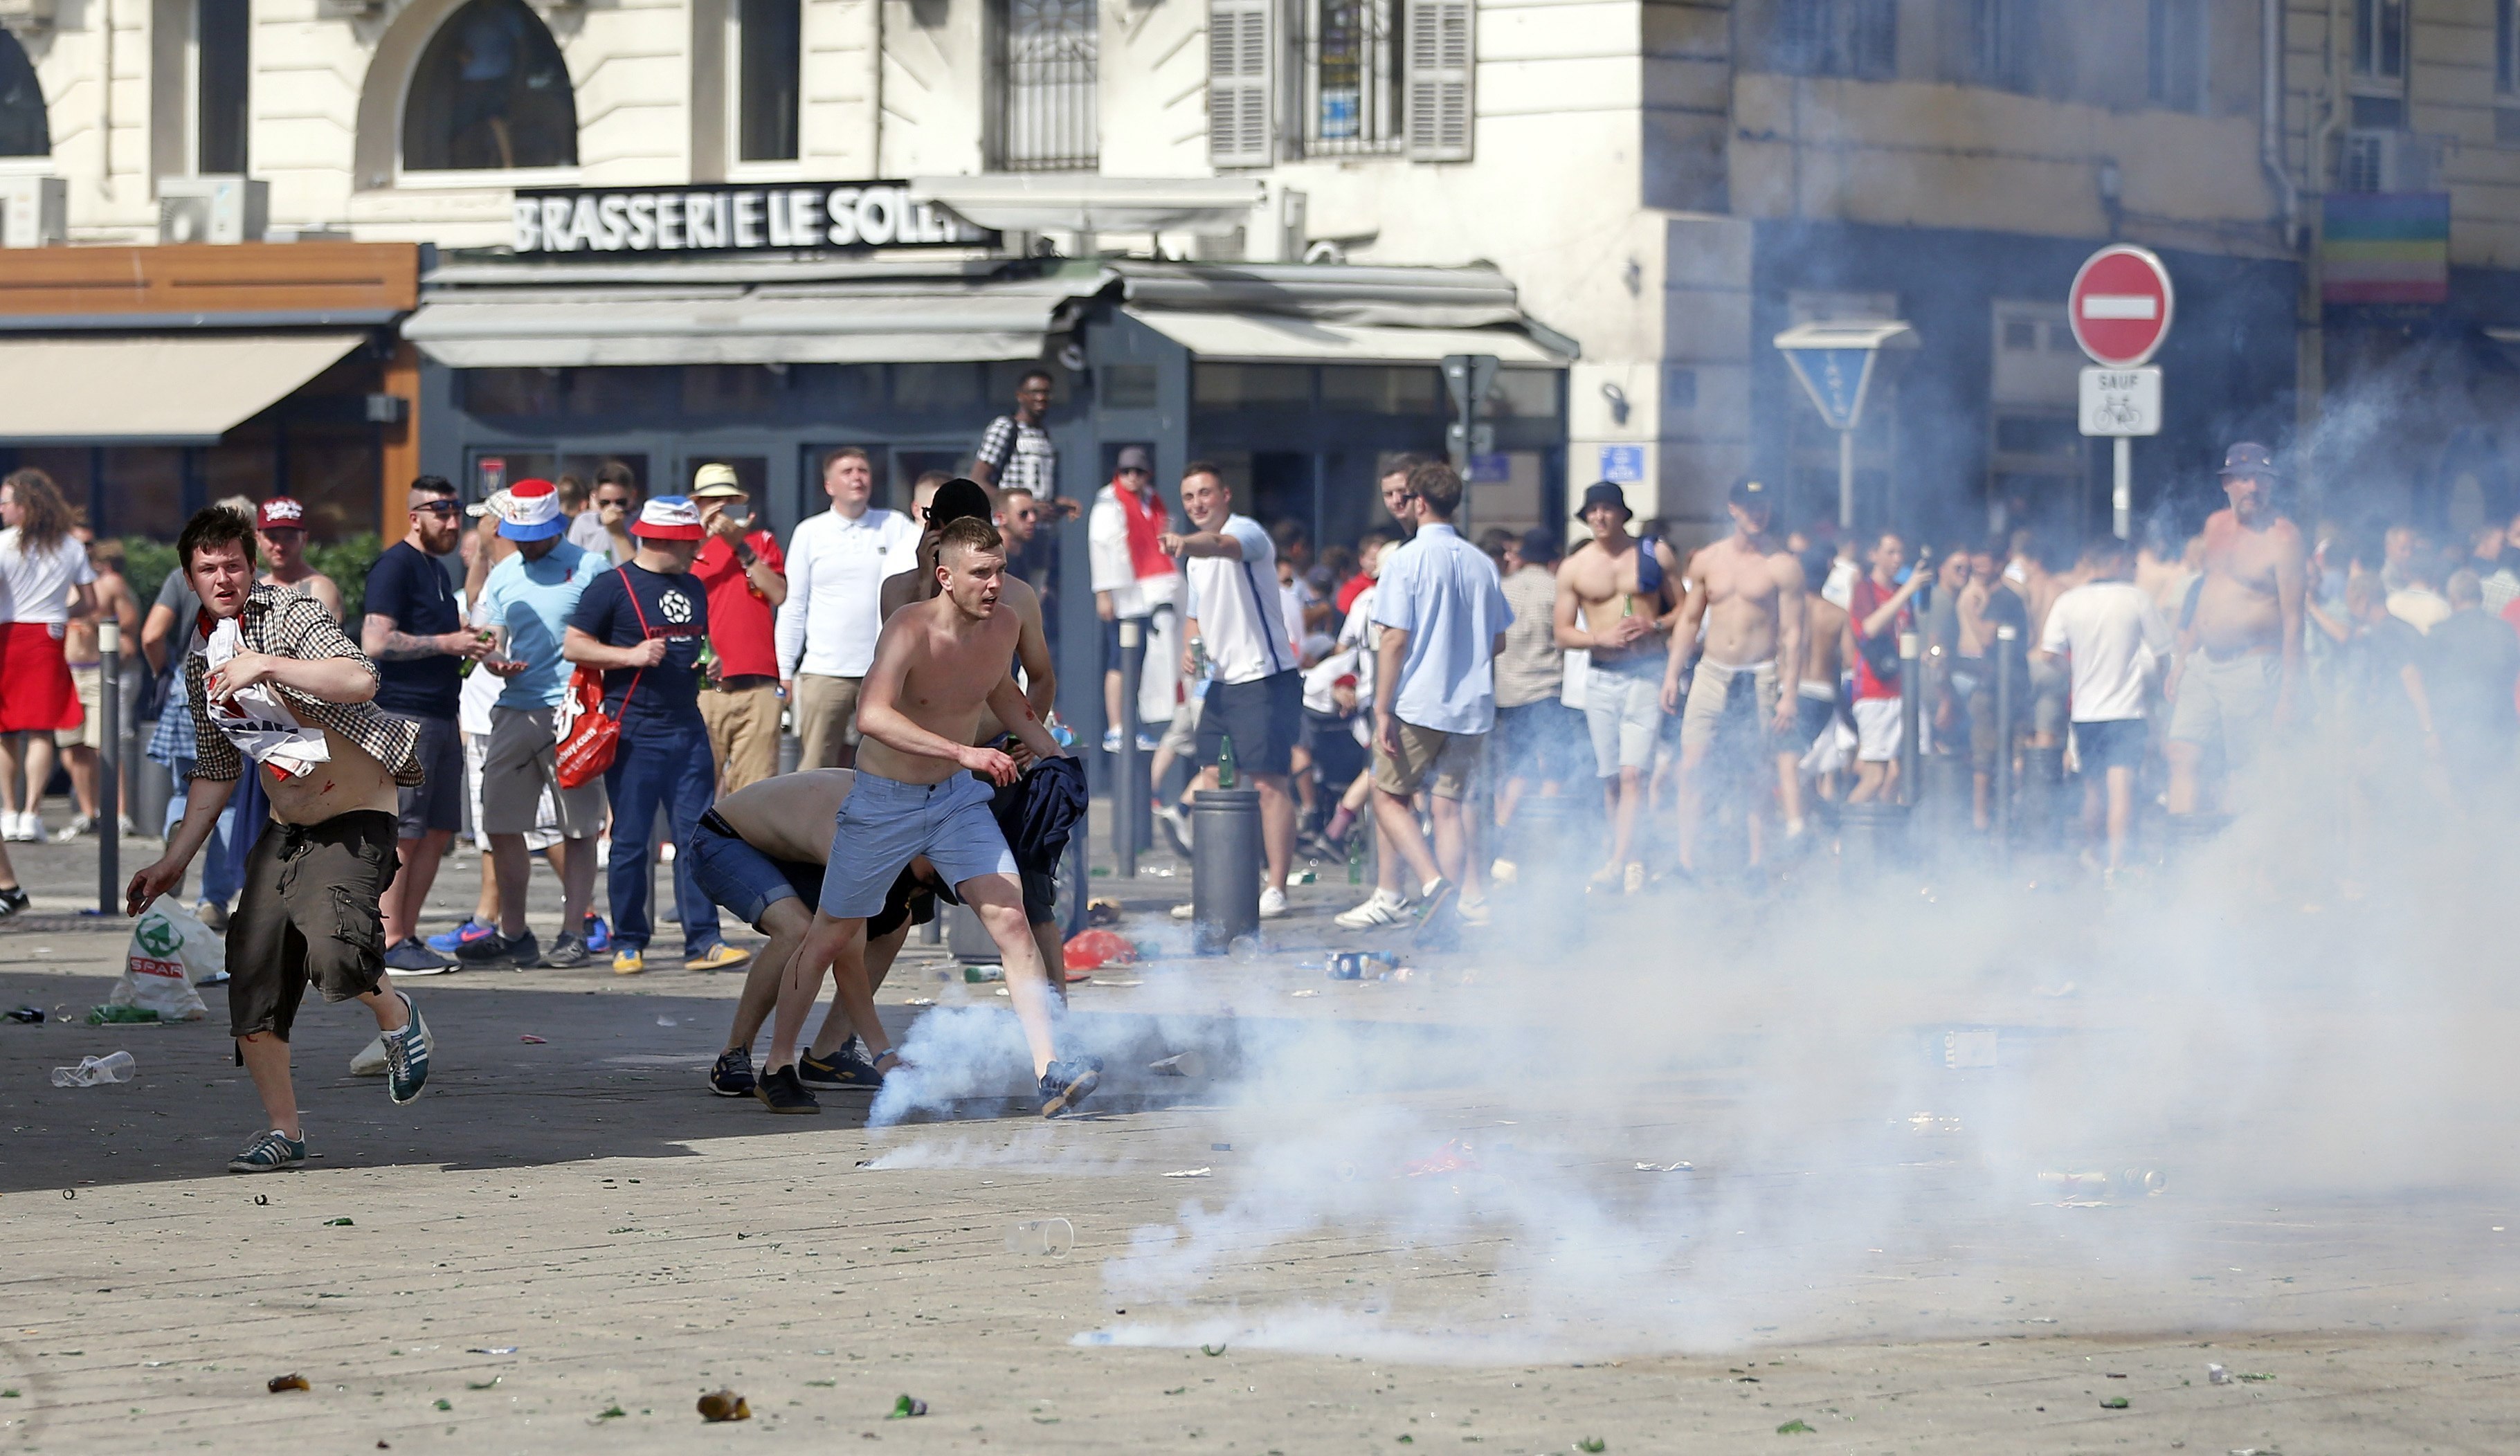 Teargas is fired at England supporters in downtown Marseille, France (AP Photo/Darko Bandic)